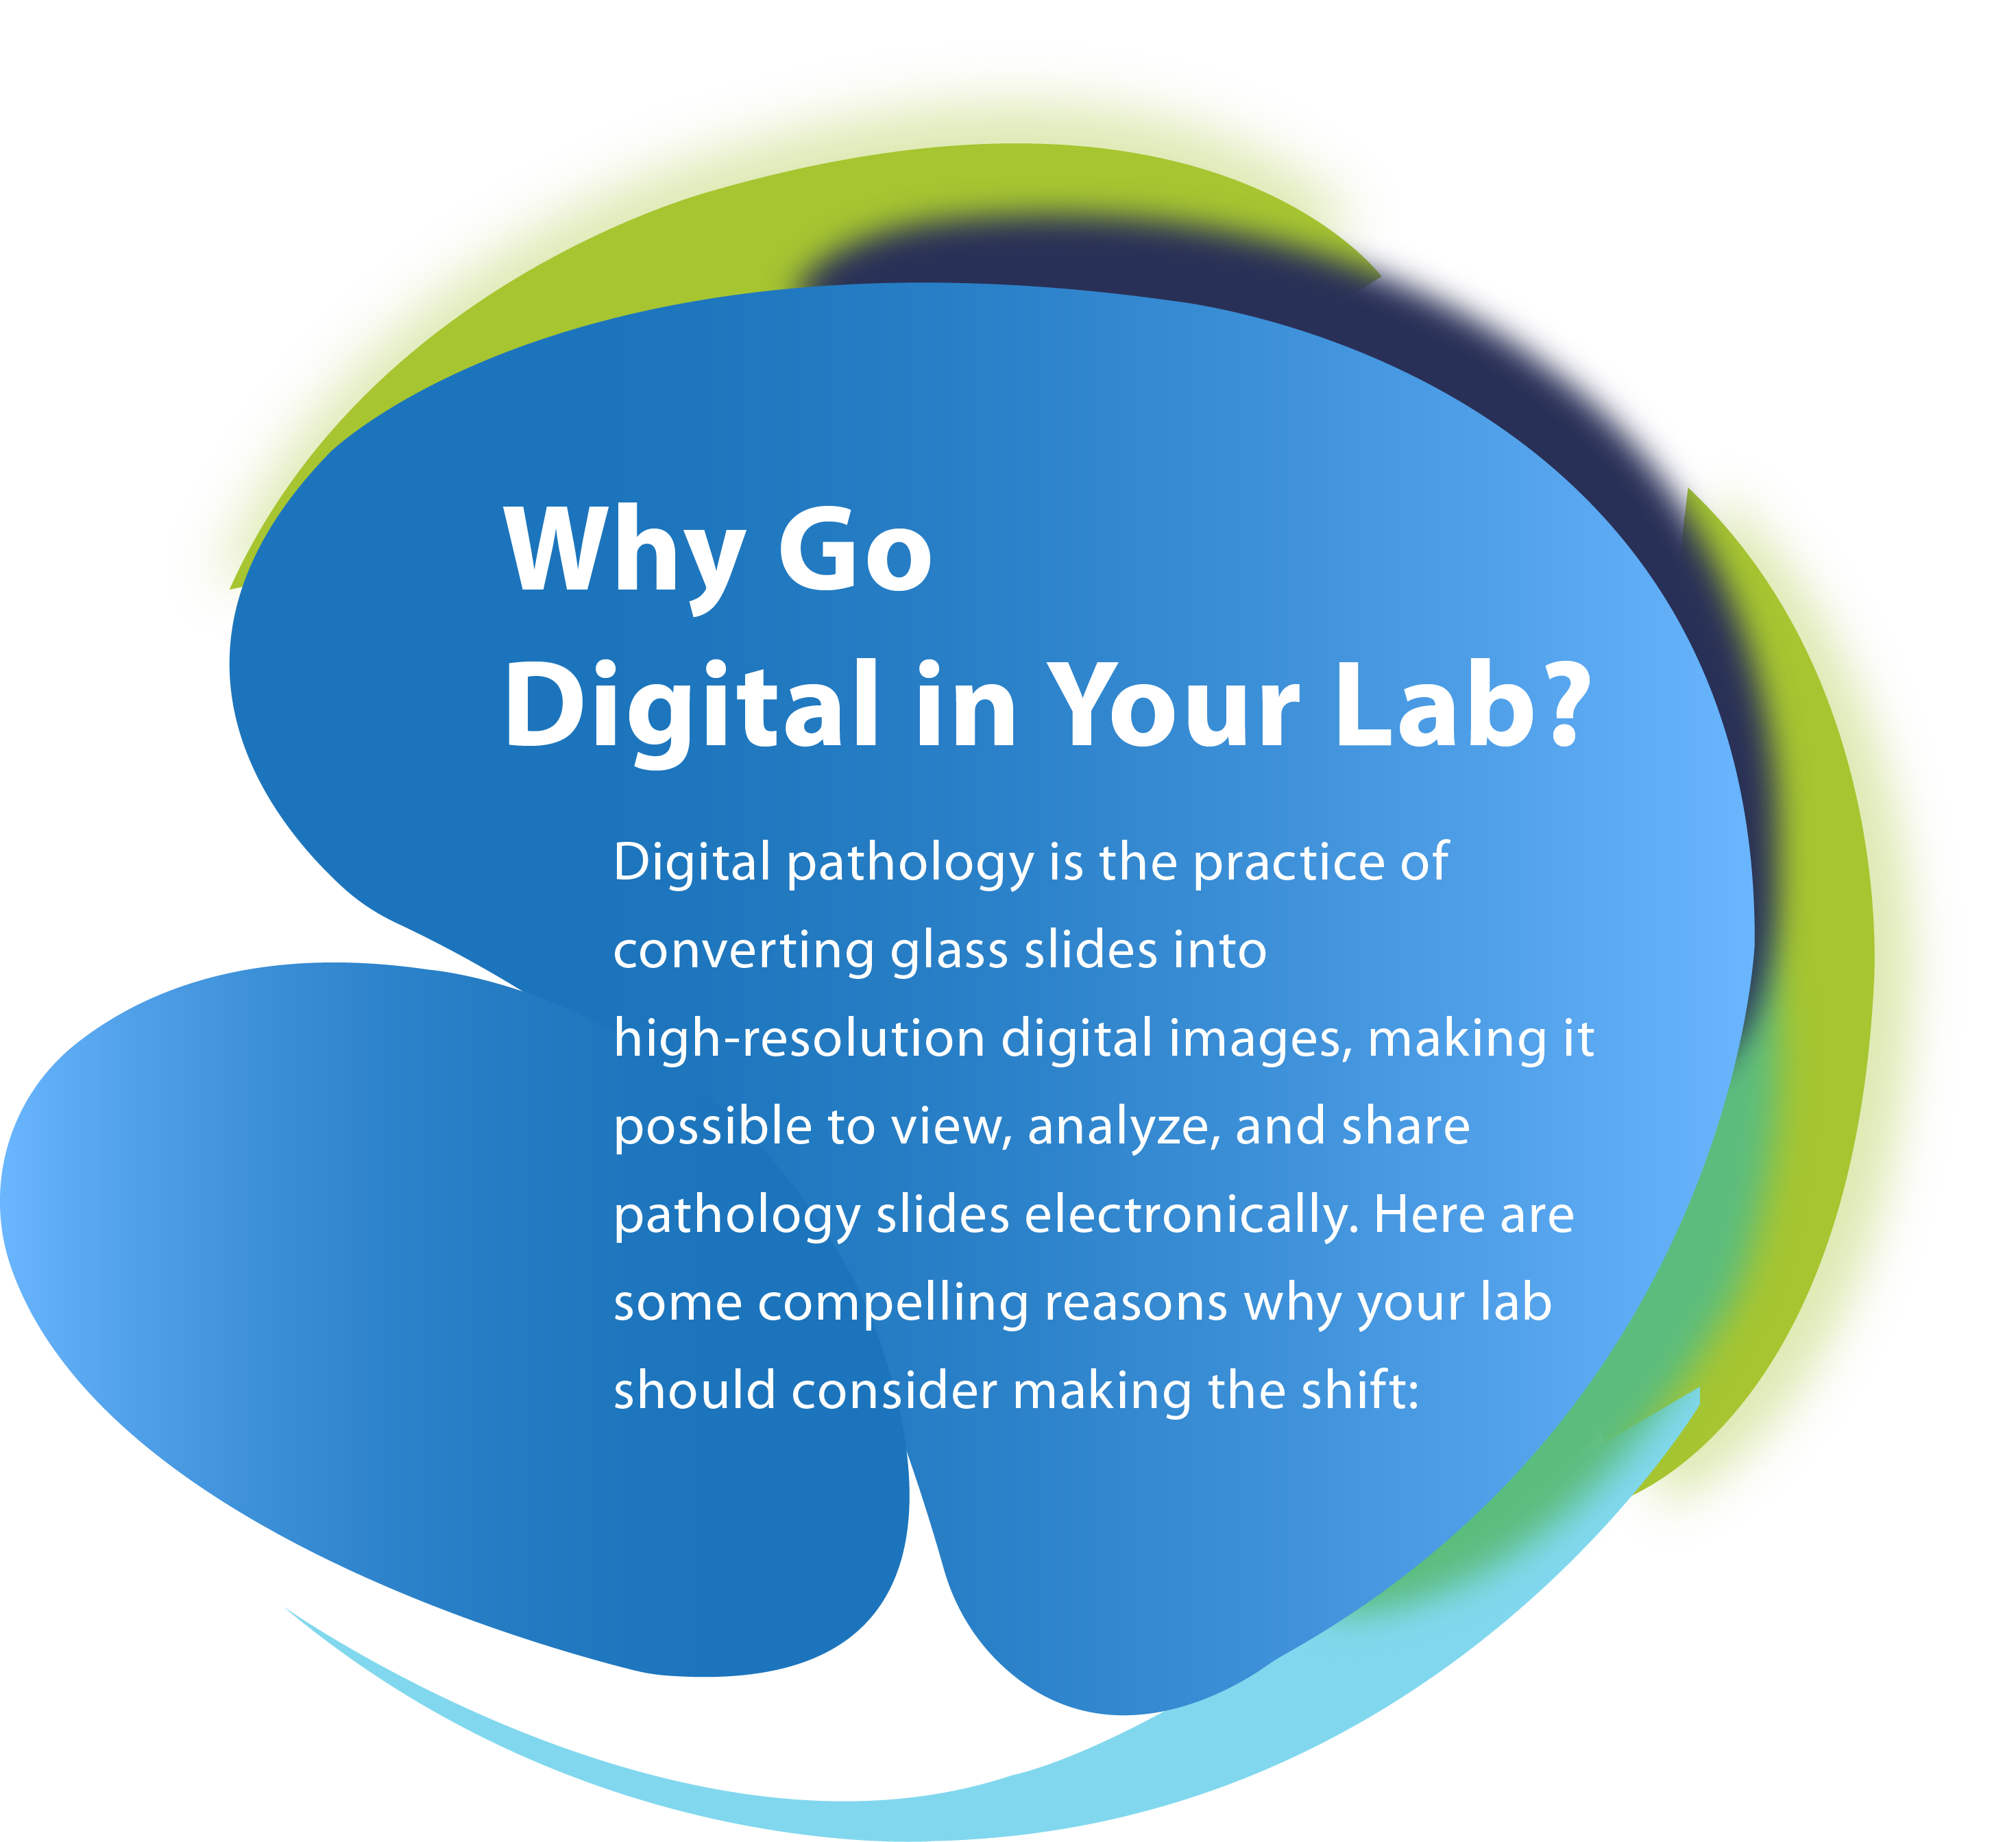 Why Go Digital in Your Lab?